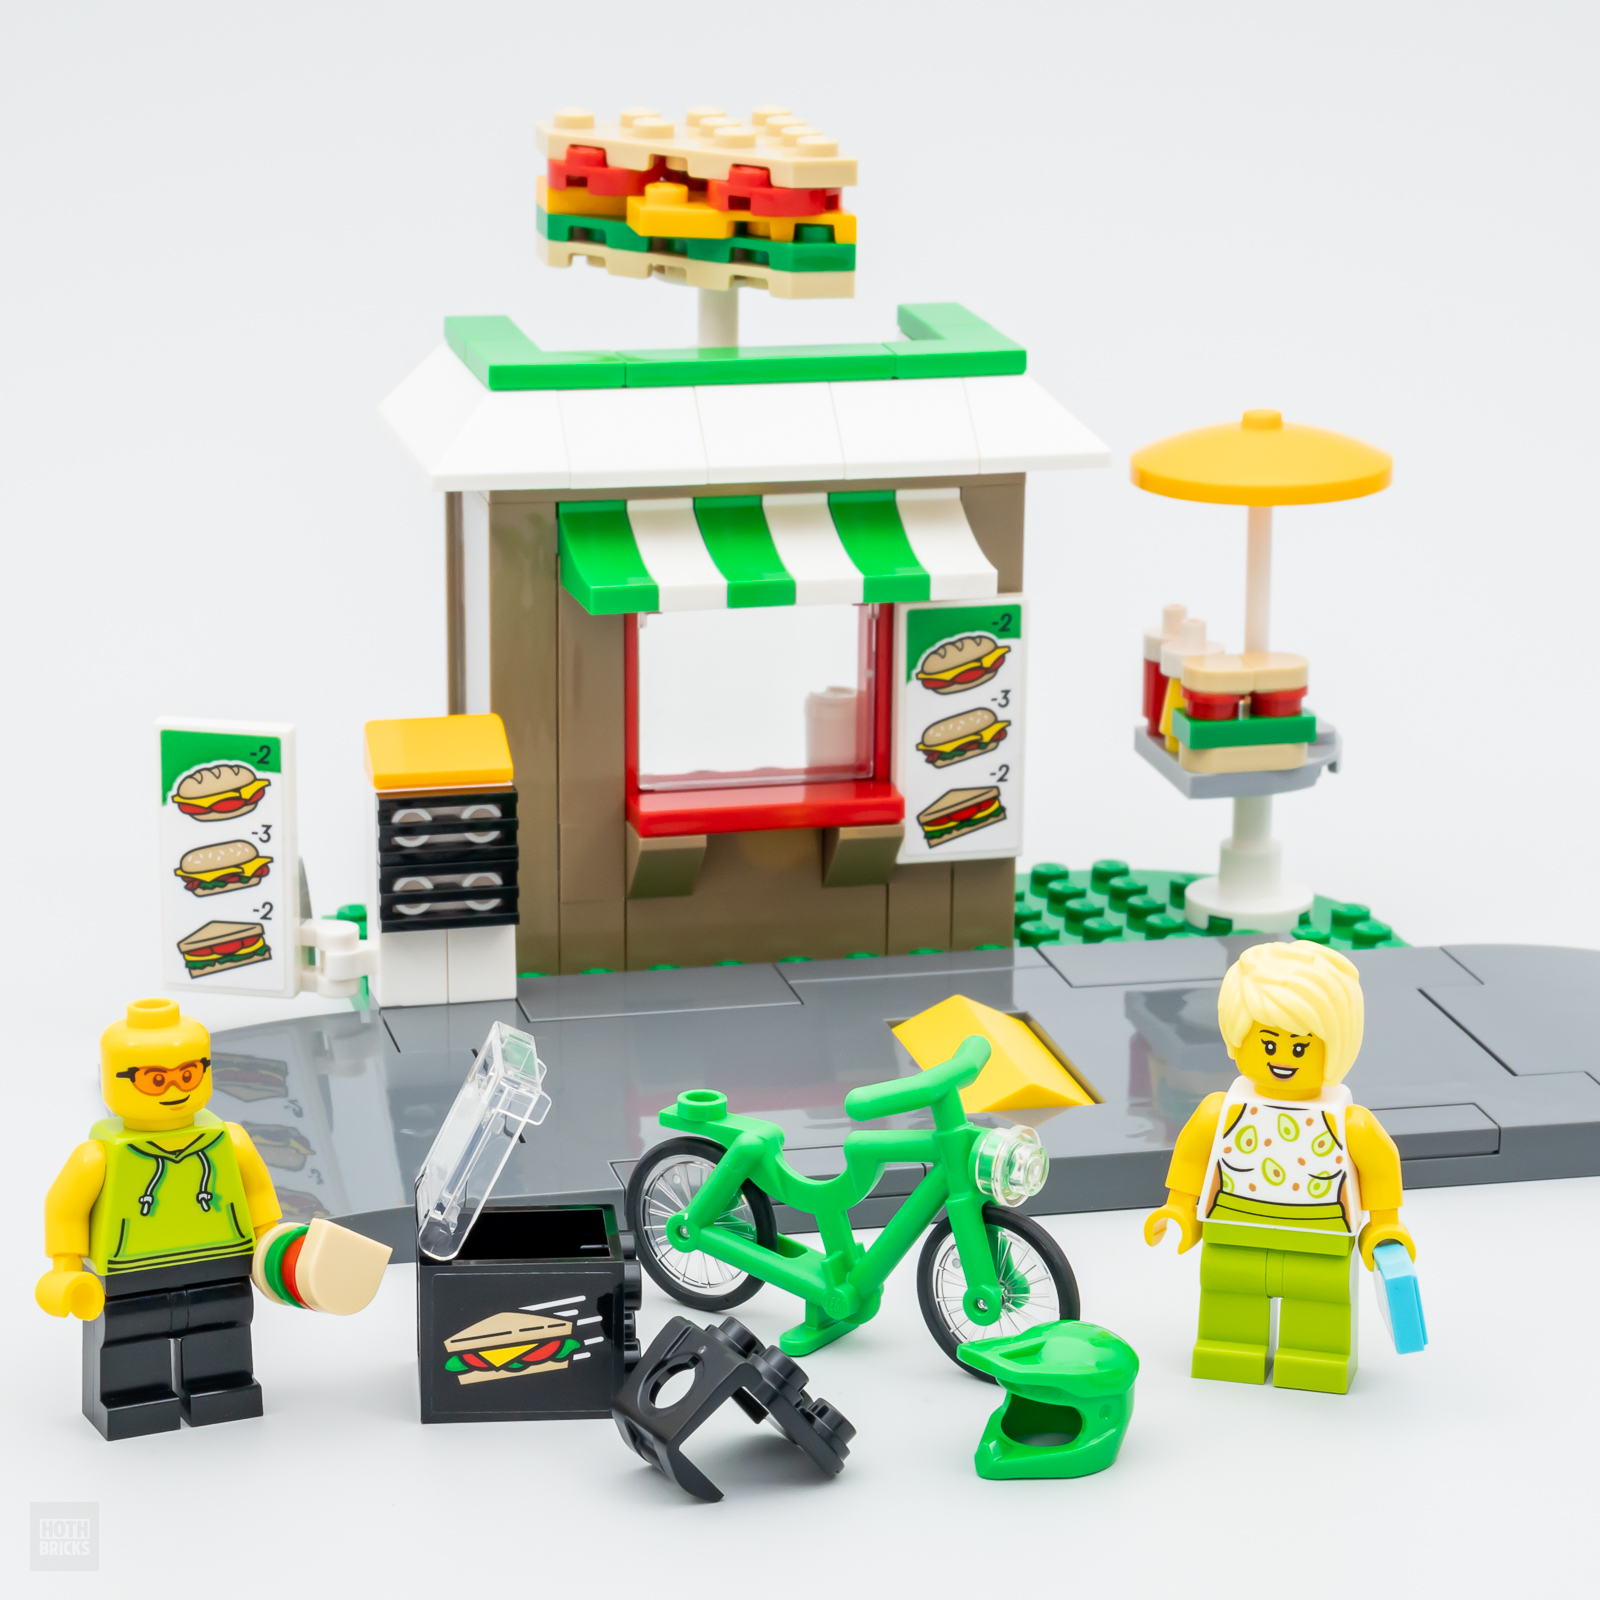 On the LEGO Shop: the LEGO CITY 40578 Sandwich Shop set is free with purchases over €90